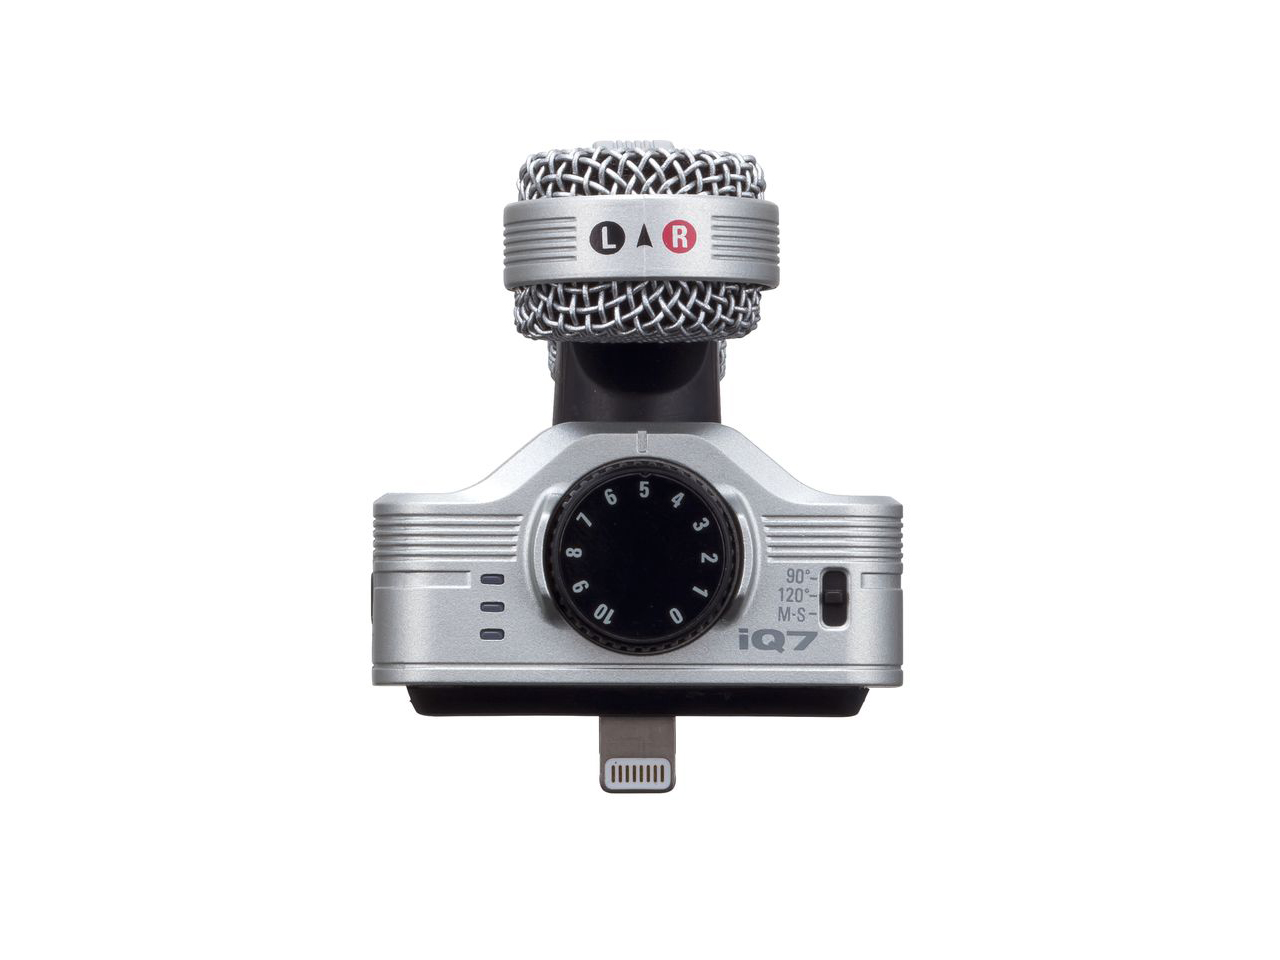 IQ7 ZOOM MS Stereo Microphone for iOS